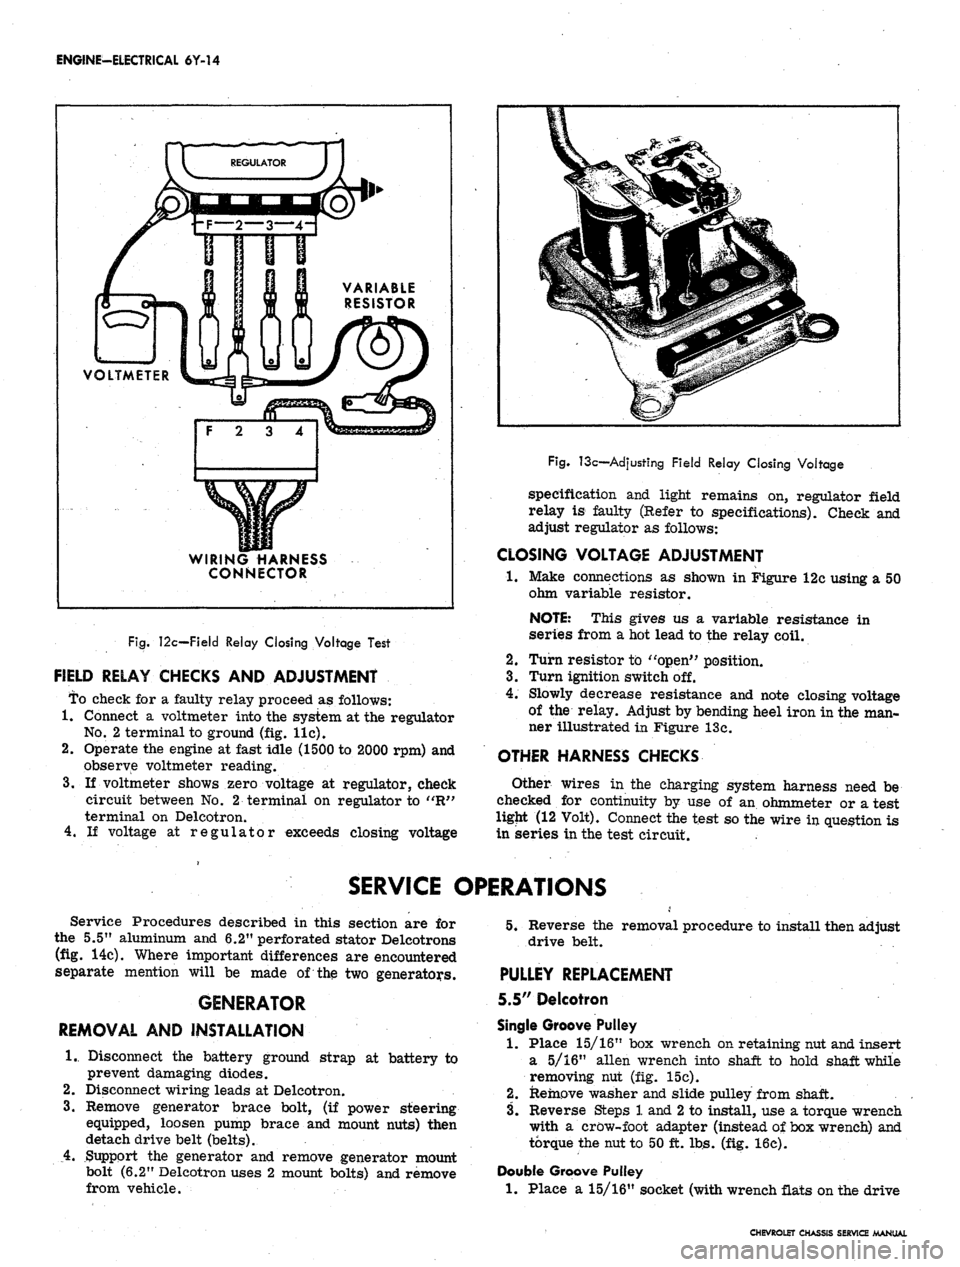 CHEVROLET CAMARO 1967 1.G Chassis Workshop Manual 
ENGINE-ELECTRICAL 6Y-14

VOLTMETER

WIRING HARNESS

CONNECTOR

Fig.
 12c—Field Relay Closing Voltage Test

FIELD RELAY CHECKS AND ADJUSTMENT

To check for a faulty relay proceed as follows:

1.
 Co